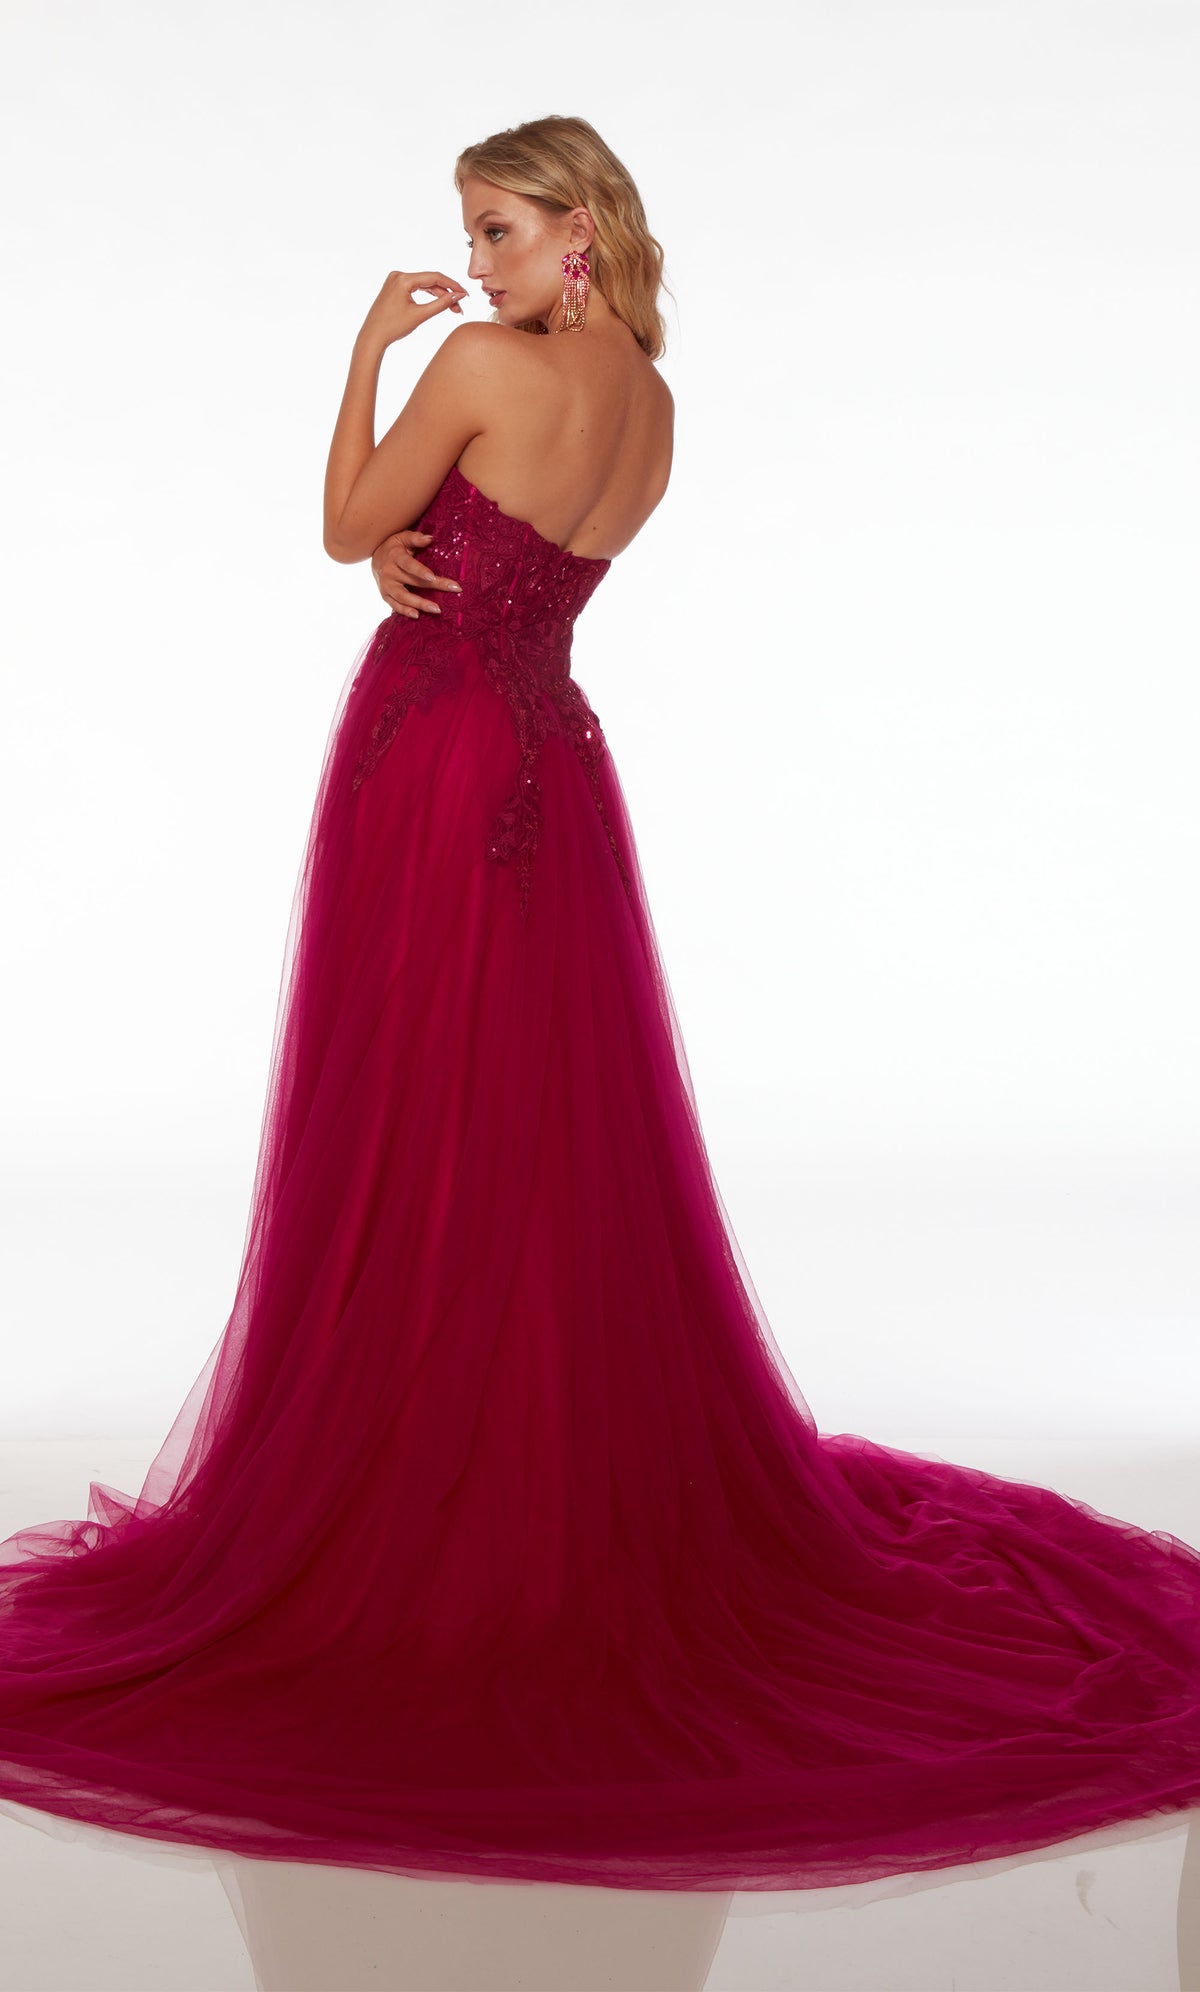 Strapless pink formal dress with lace bodice, tulle skirt featuring an side slit, zipper back enclosure, and an gracefully long train.